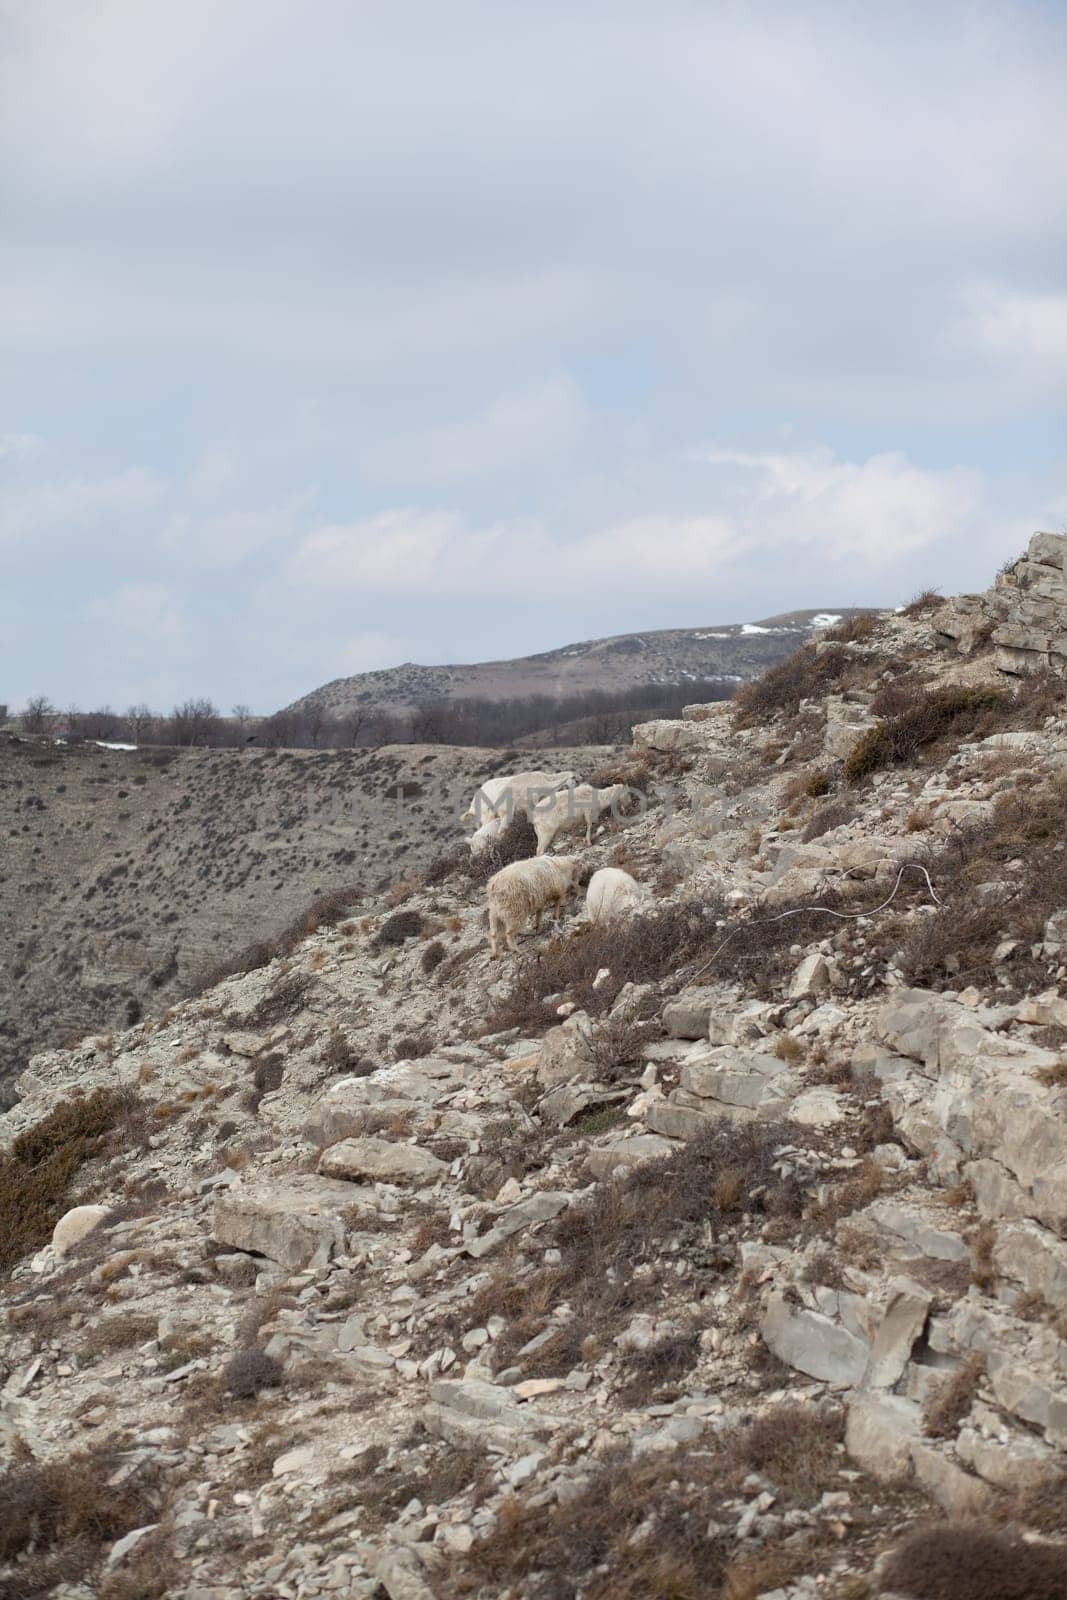 Goats are resting in the rocks on the mountainside. White goats walk and graze on a steep mountainside in Dagestan, Russia.